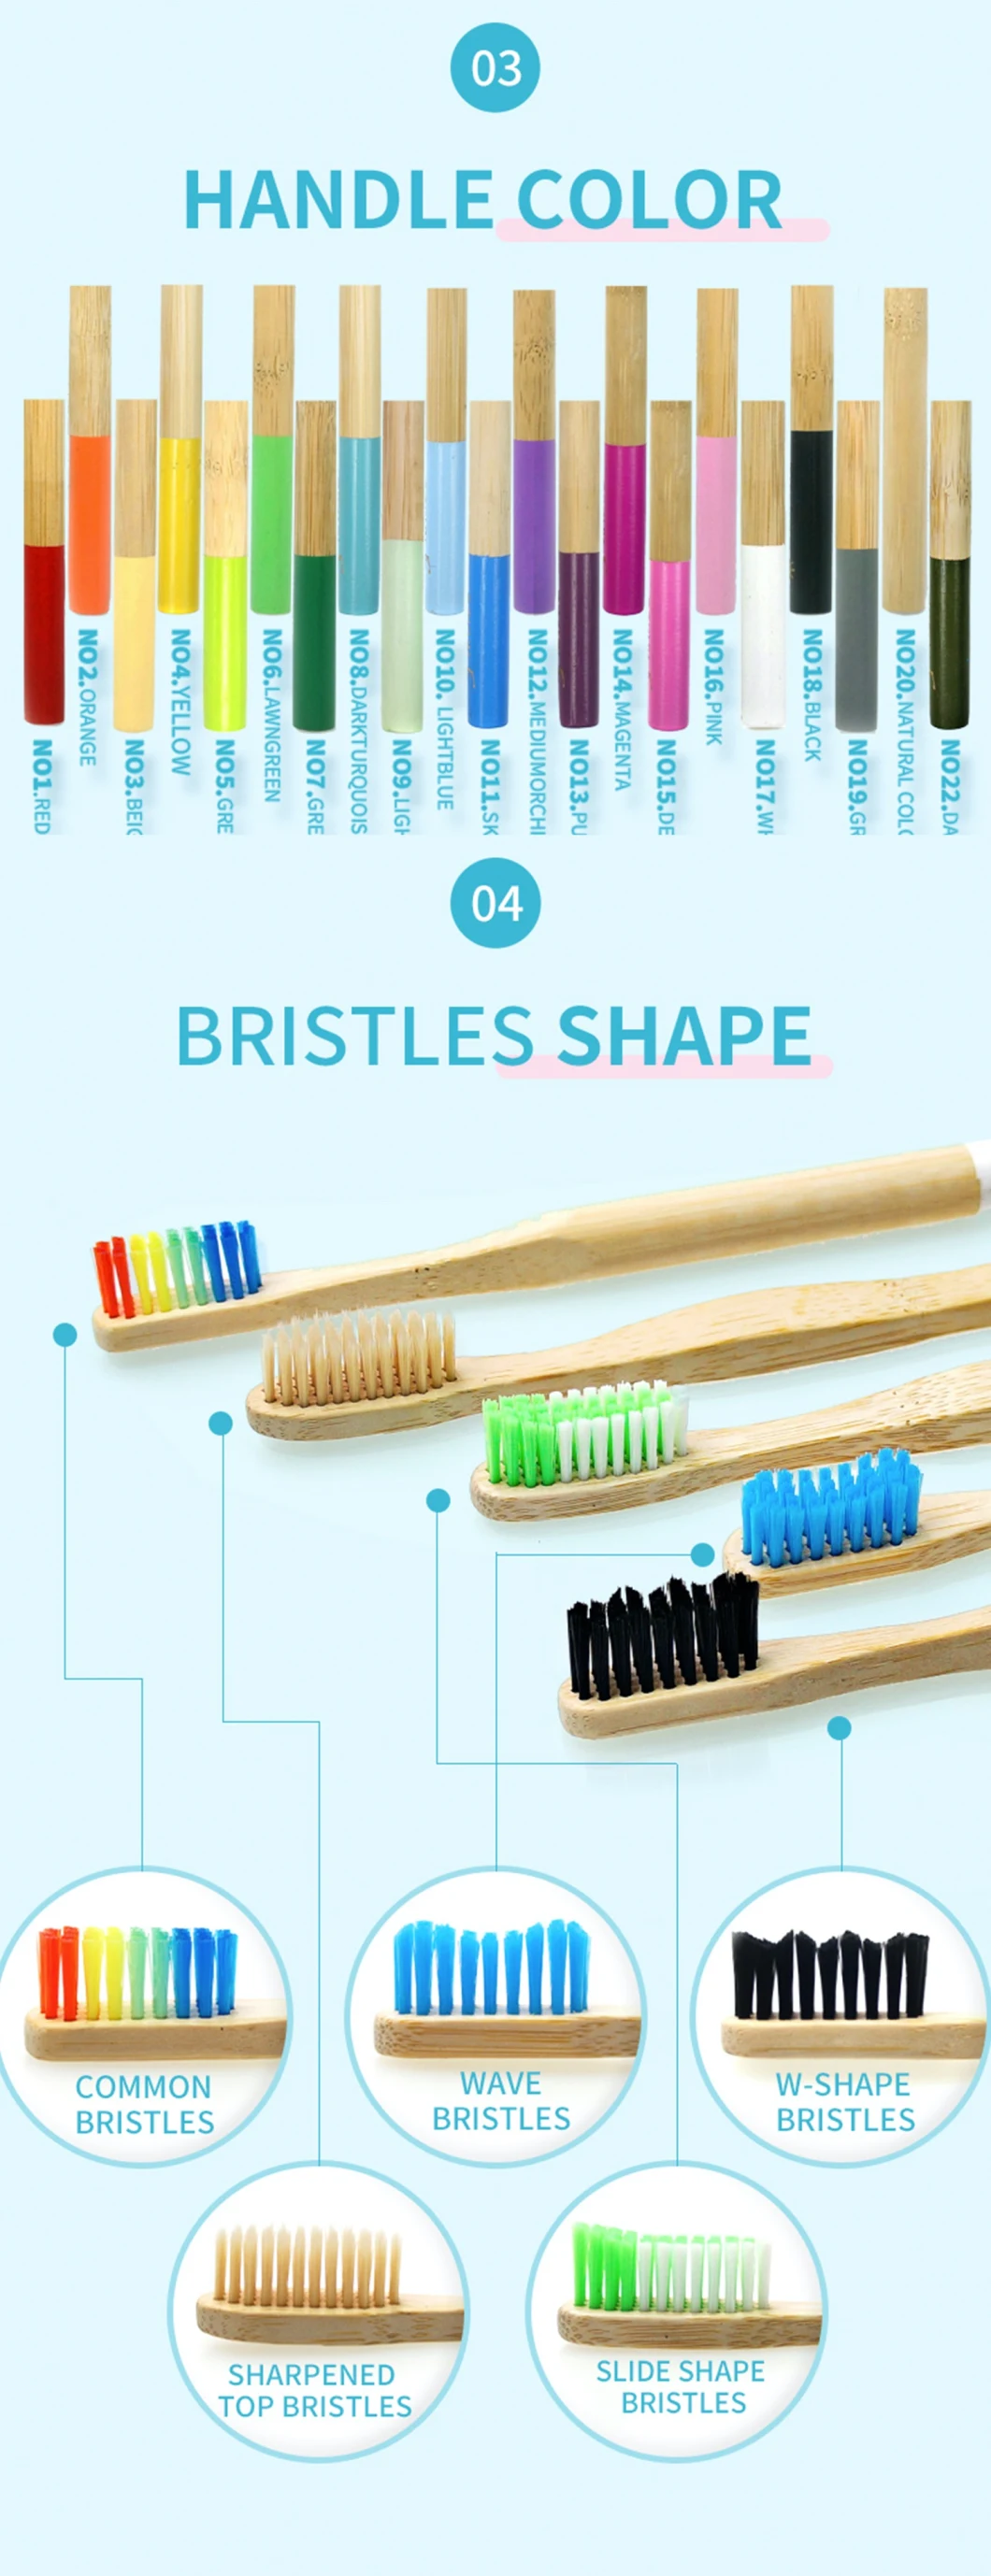 Eco- Friendly Biodegrable Charcoal Bristles OEM Bamboo Adult/Kids Bamboo Toothbrush Charcoal Soft Toothbrush